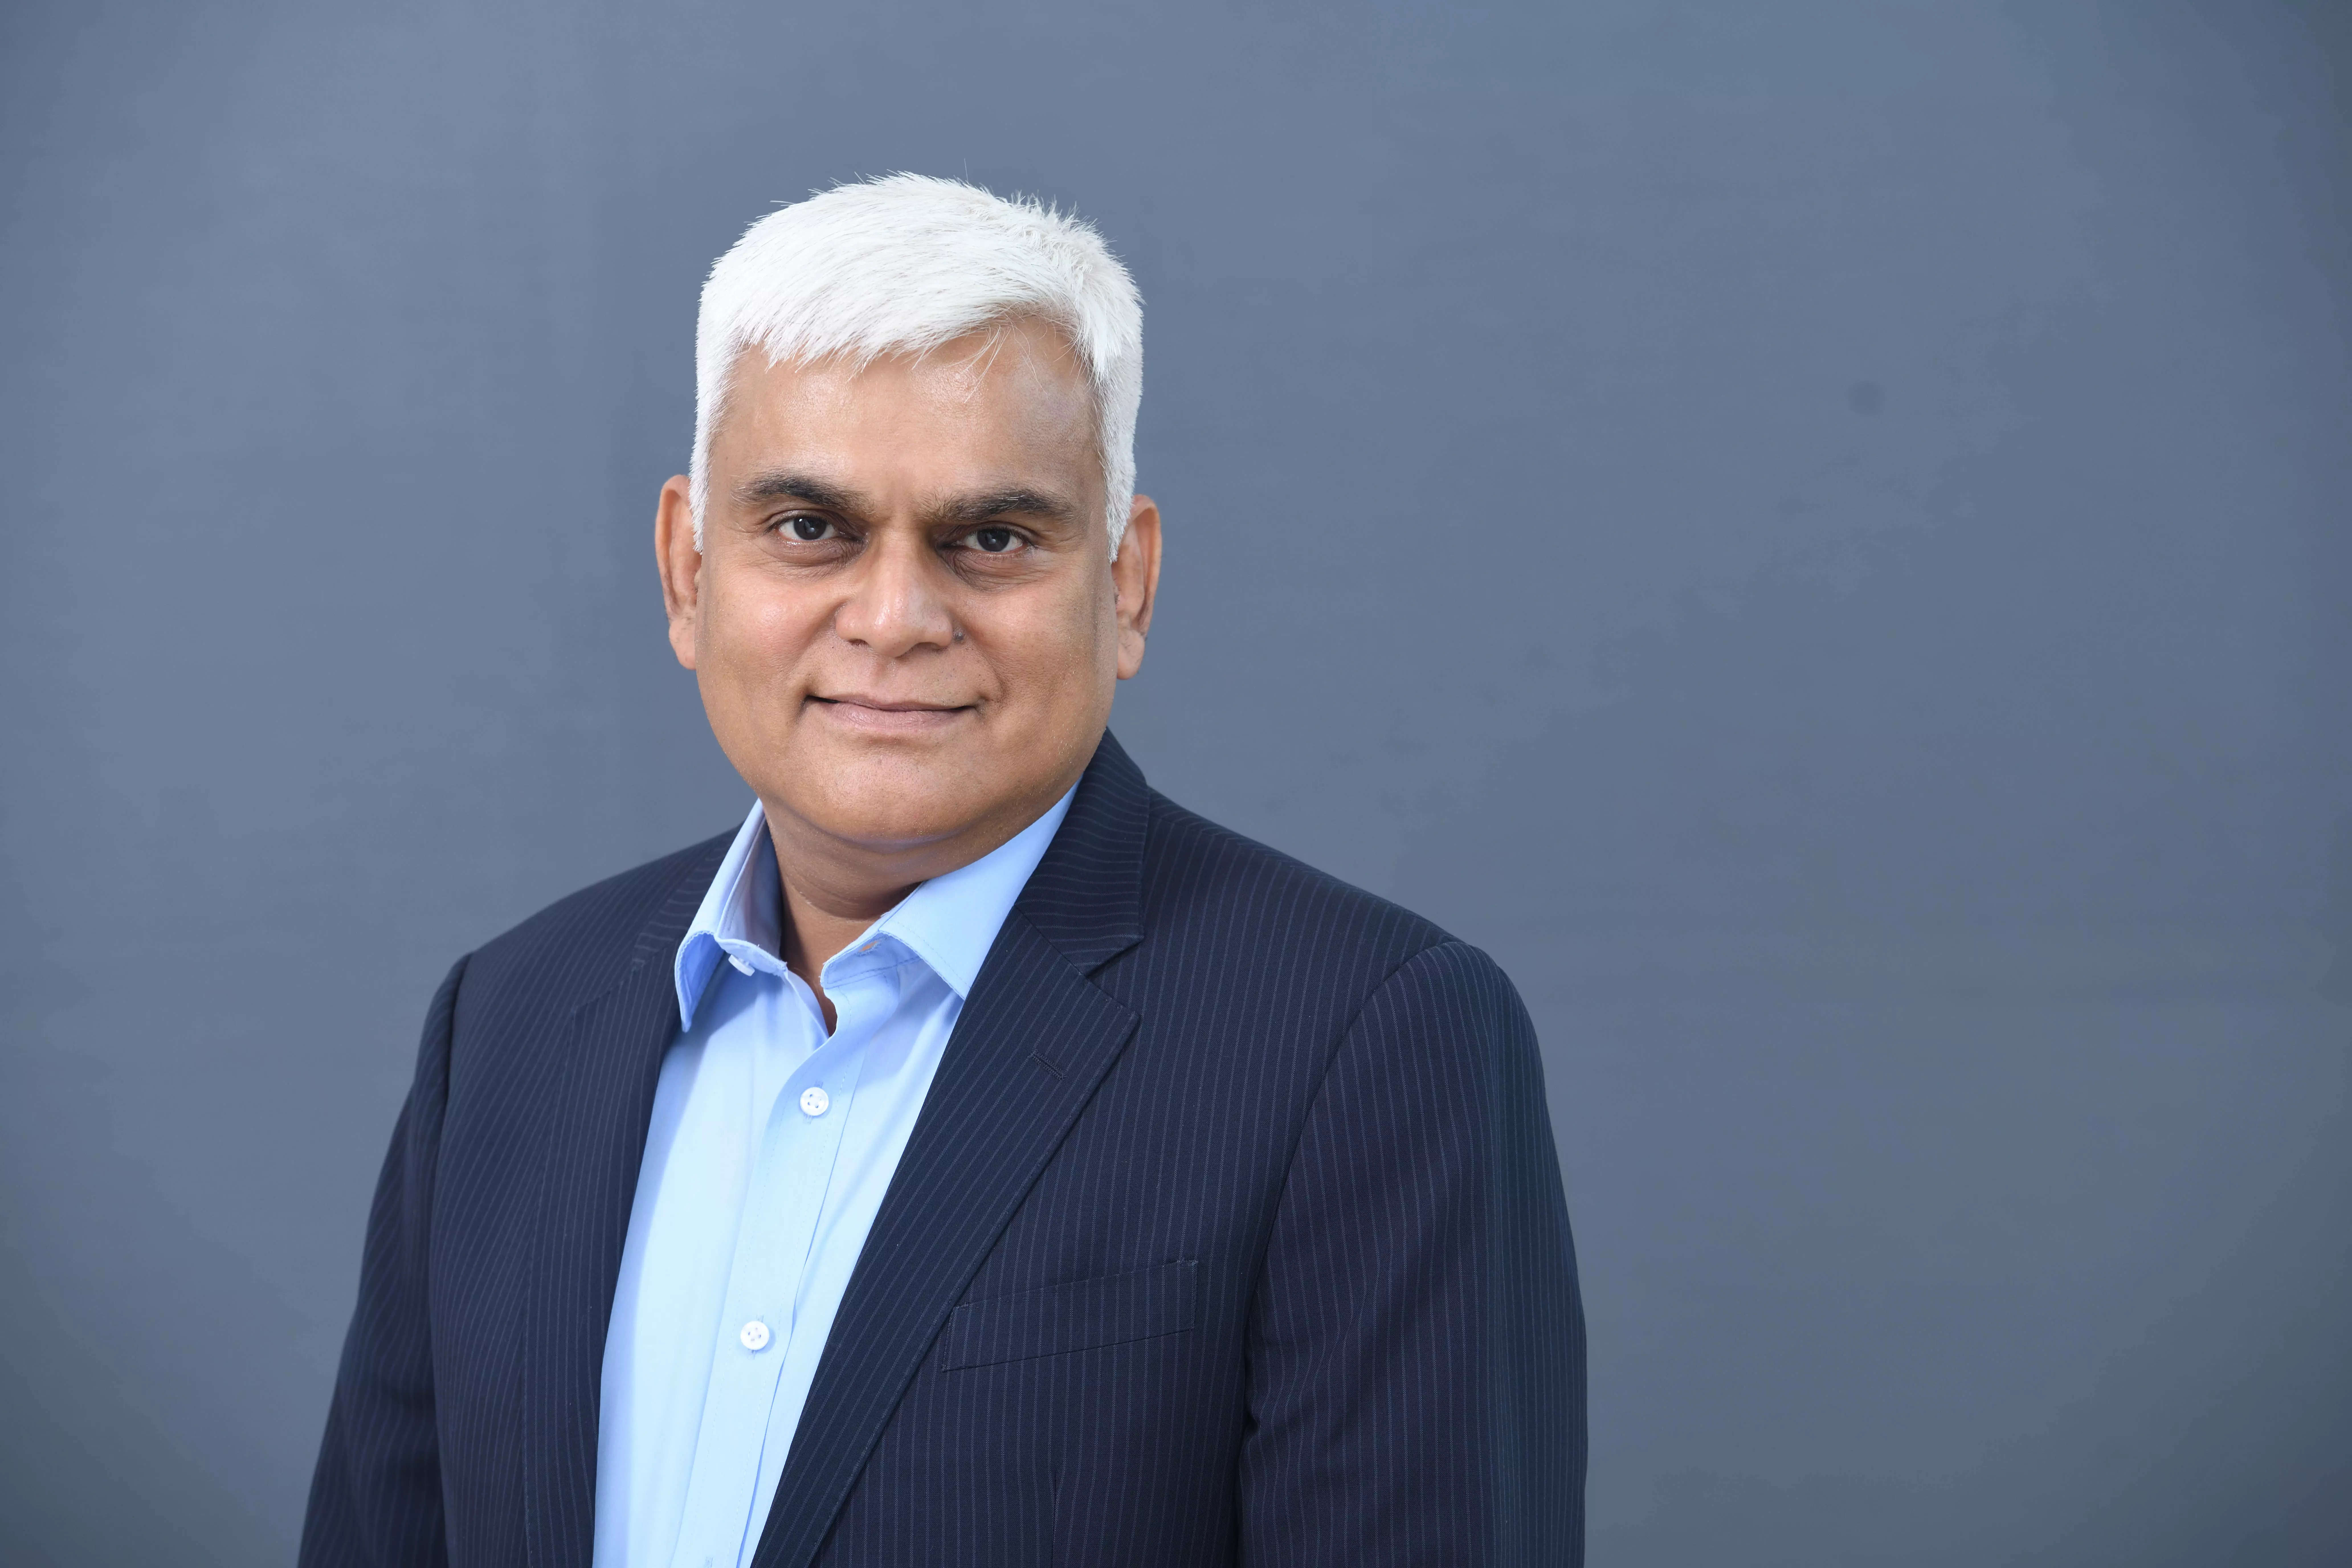  Kishor Patil, co-founder, CEO and MD, KPIT Technologies